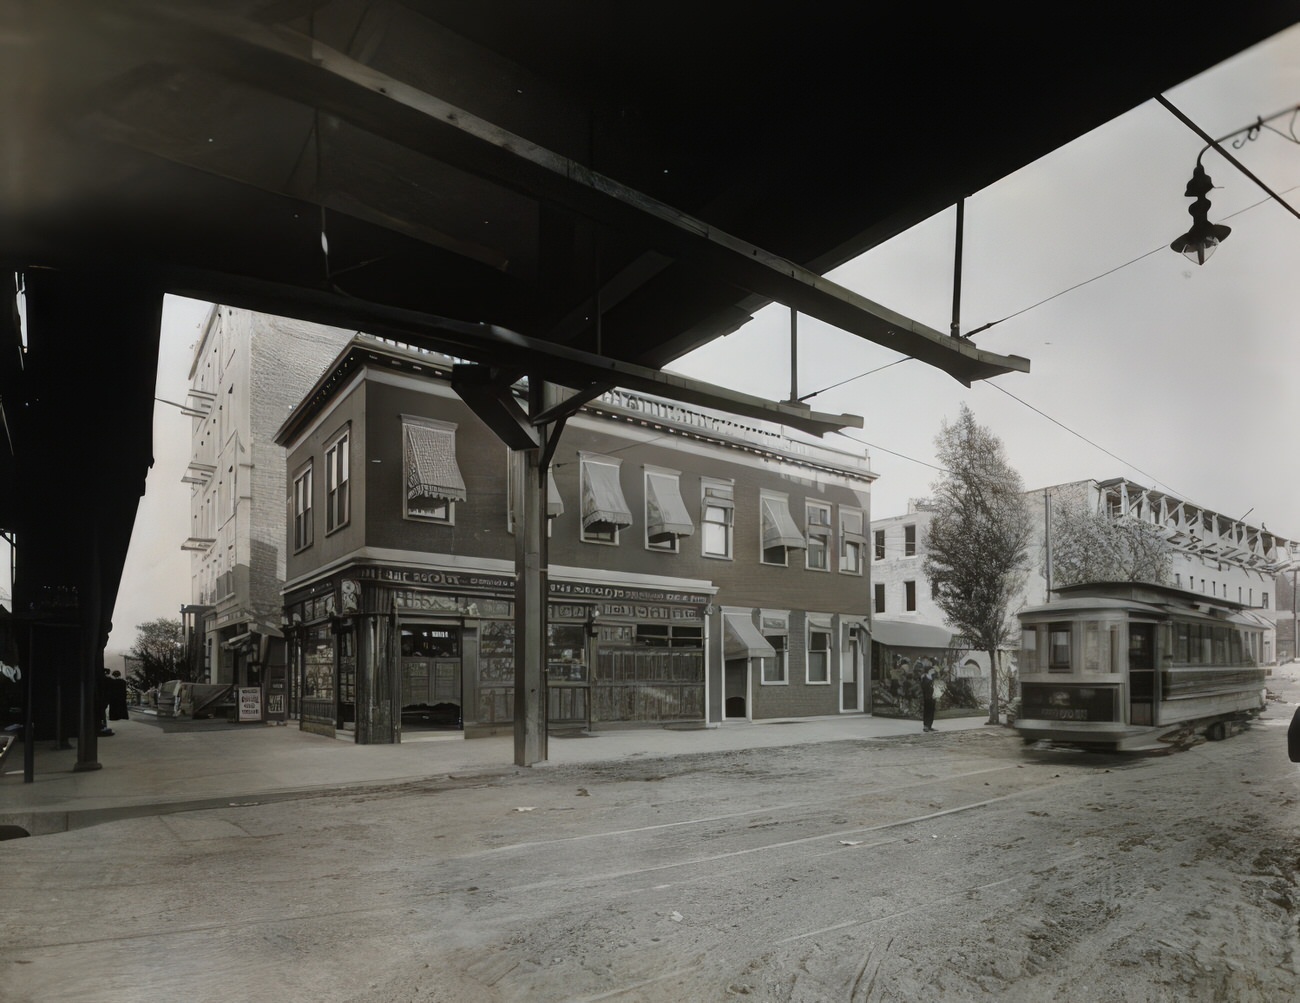 New Apartments At Northeast Corner Of 238Th Street And Broadway, Circa 1920.